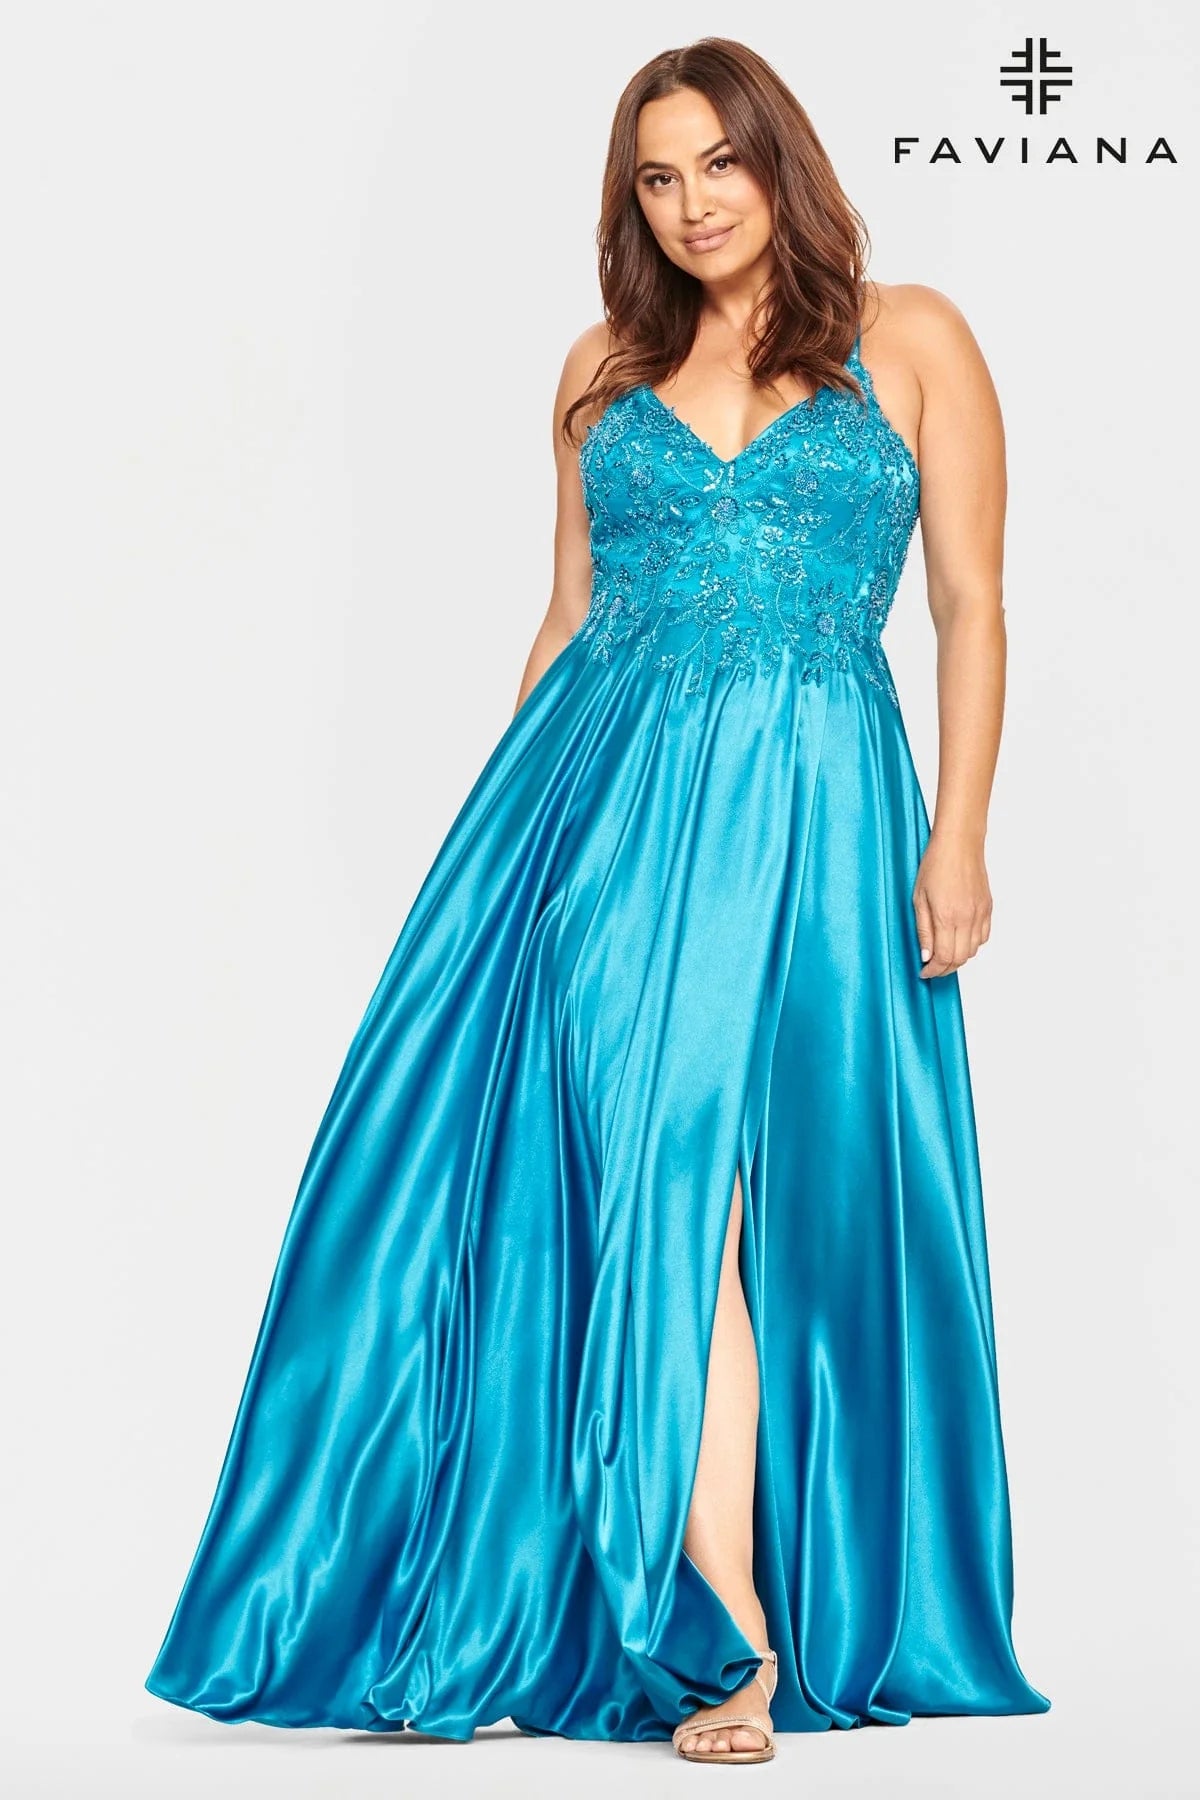 The Curvy Bride's Guide to Finding the Right Plus-Size Gown